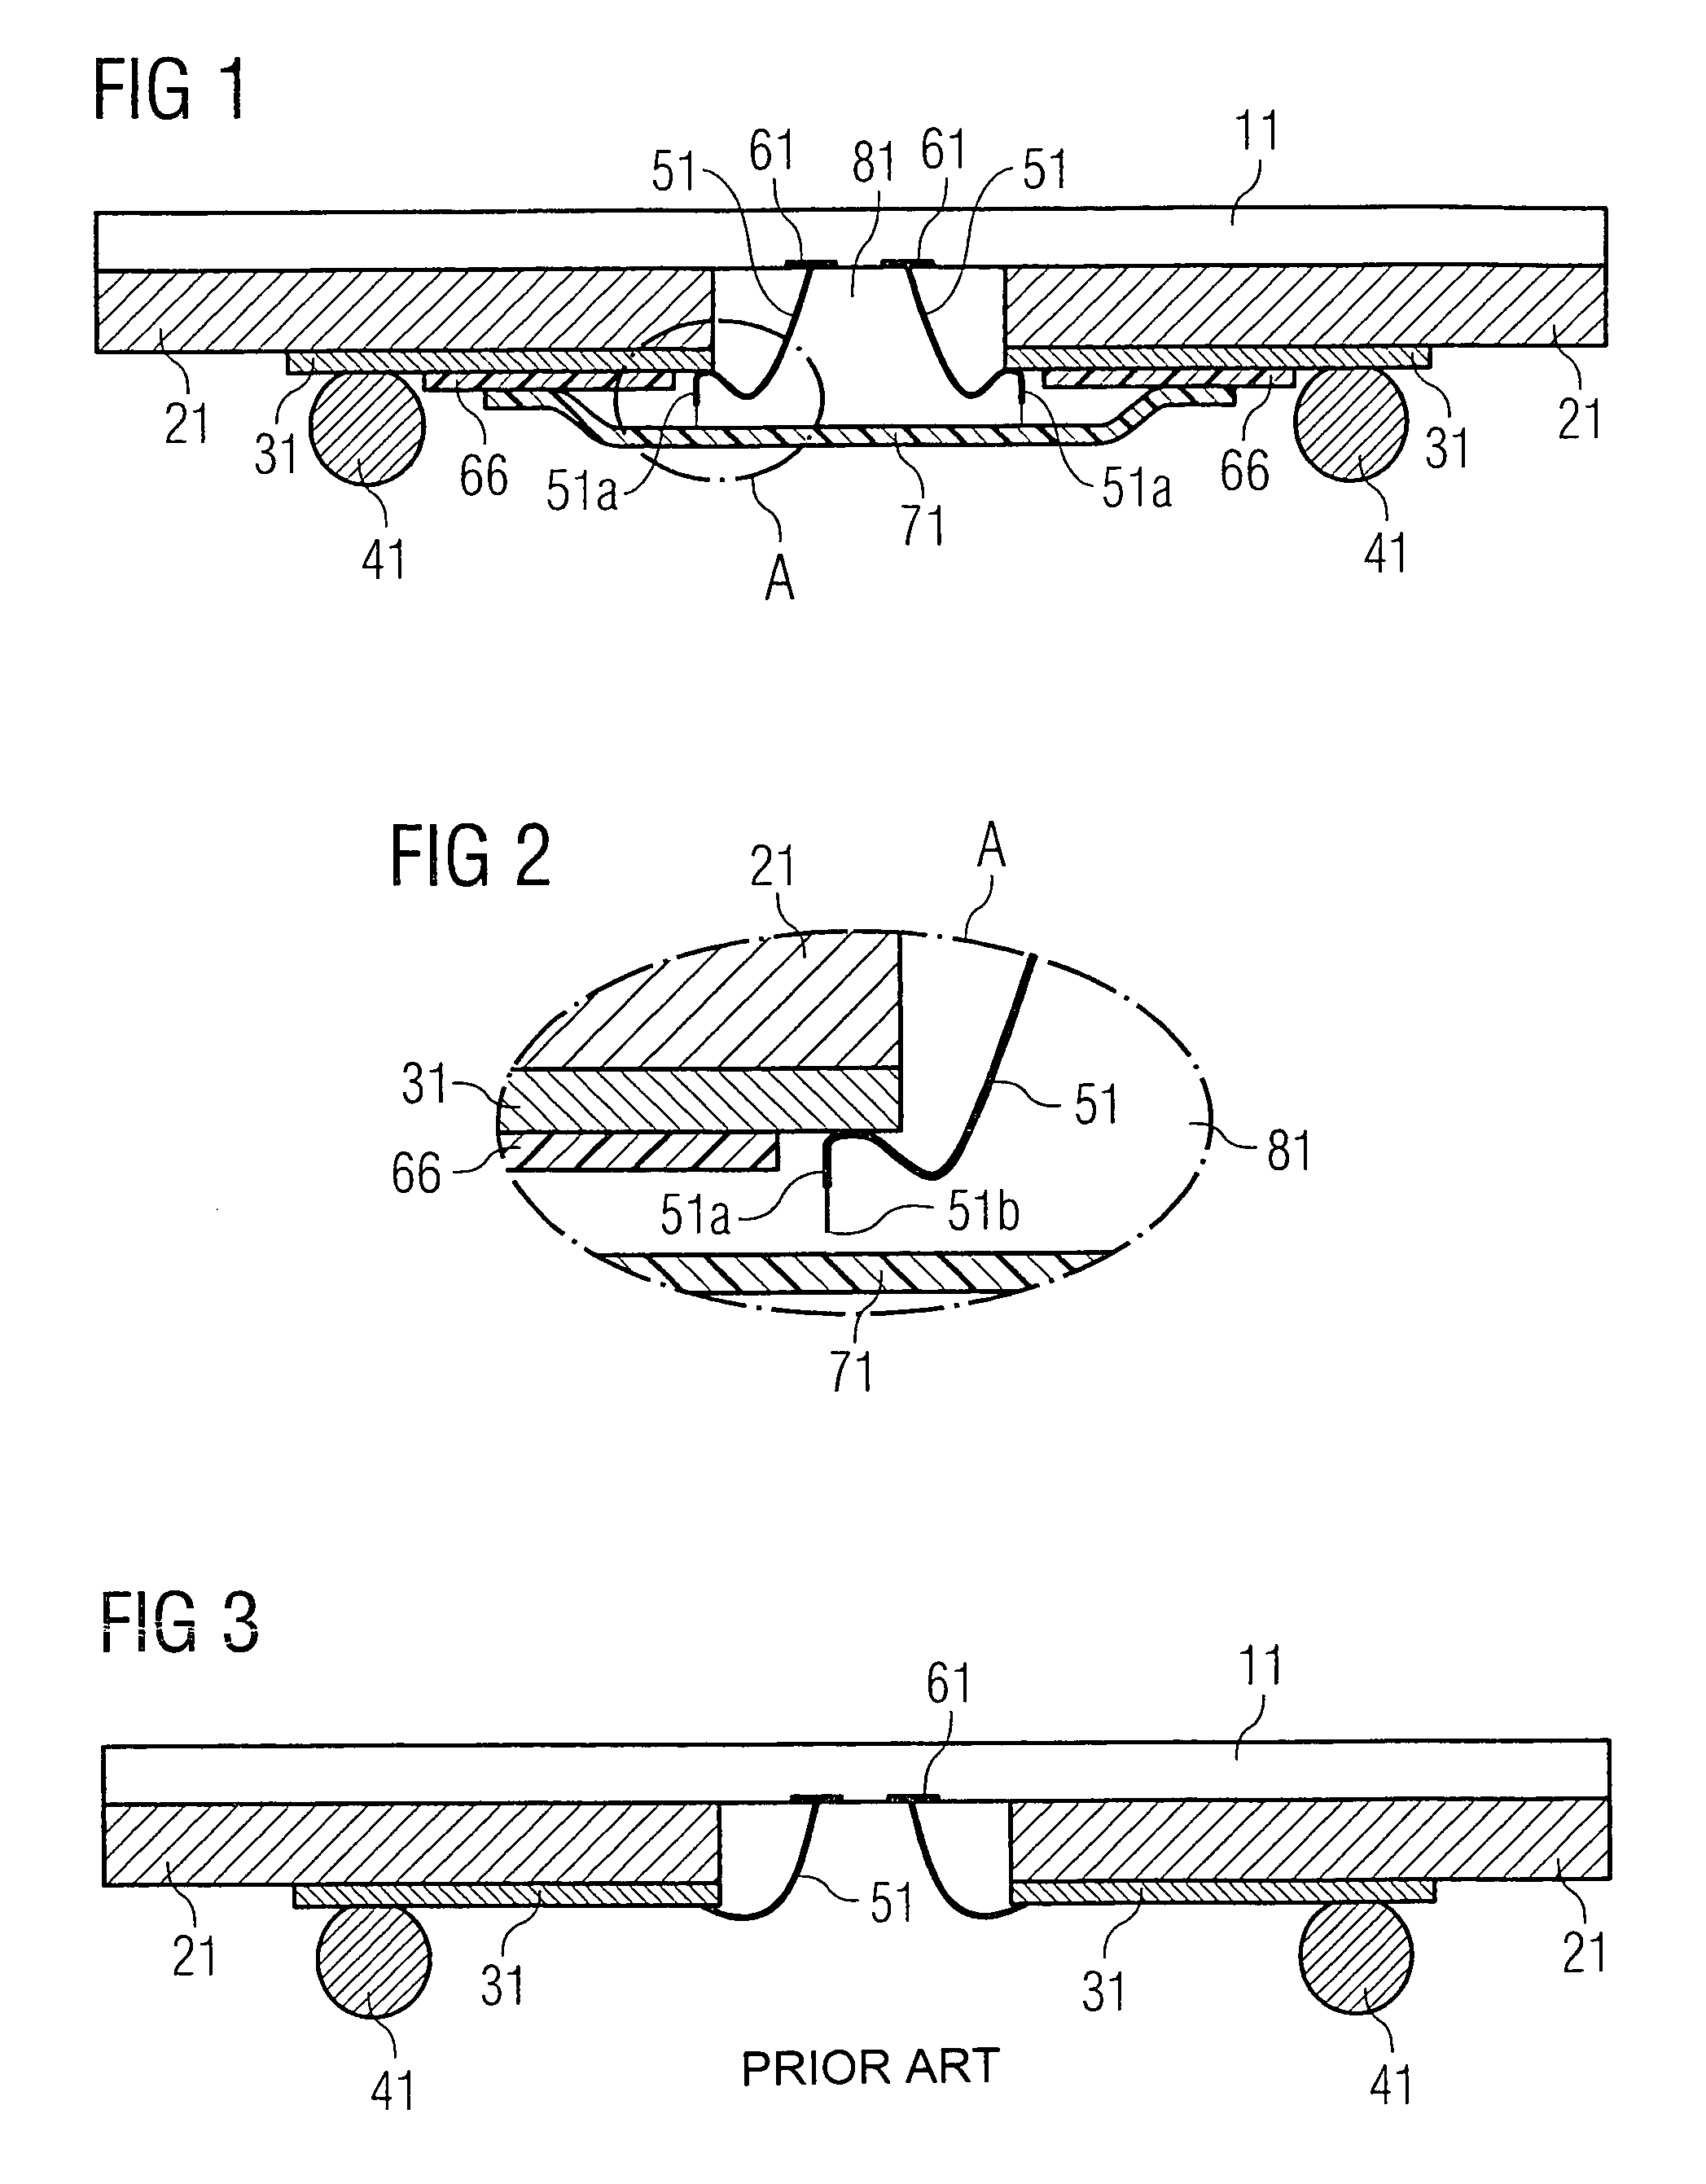 ESD protection apparatus for an electrical device